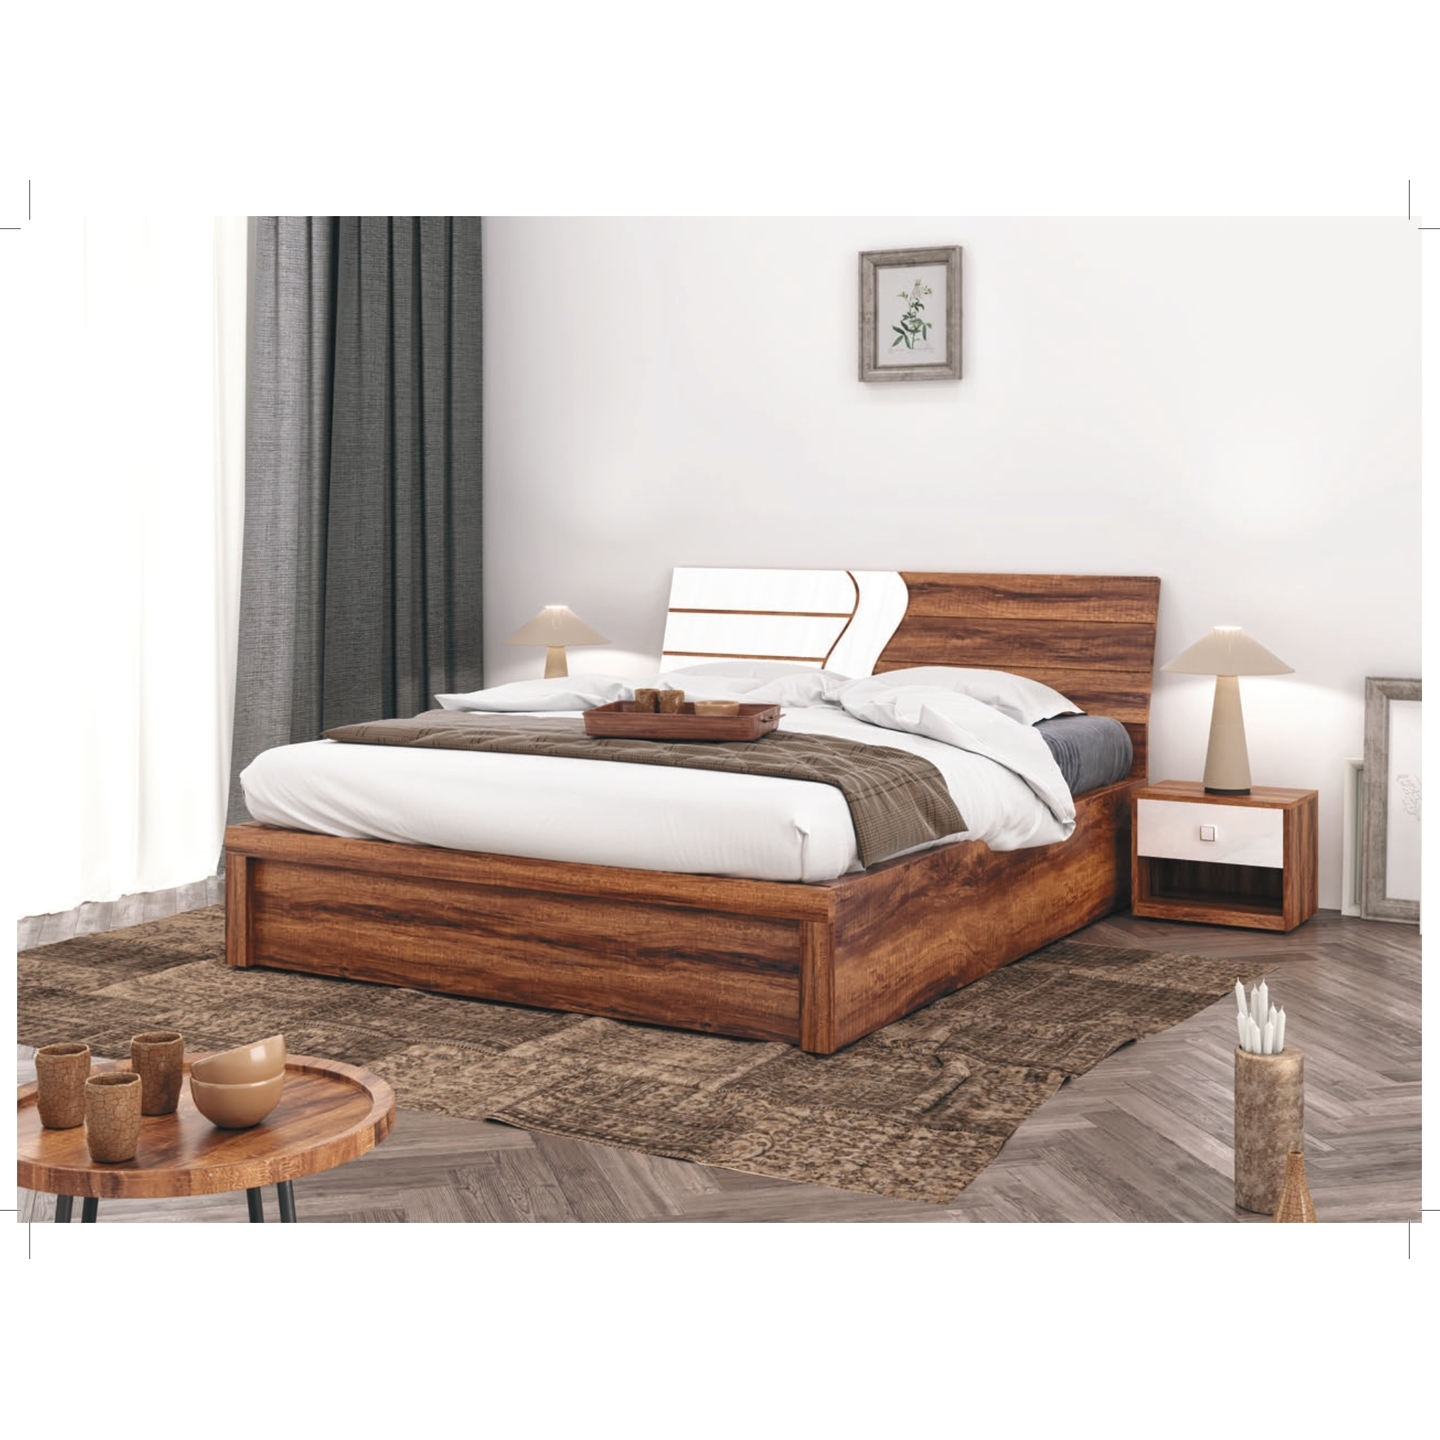 RLF King Size Bed 78x72 Modis In Brown Colour